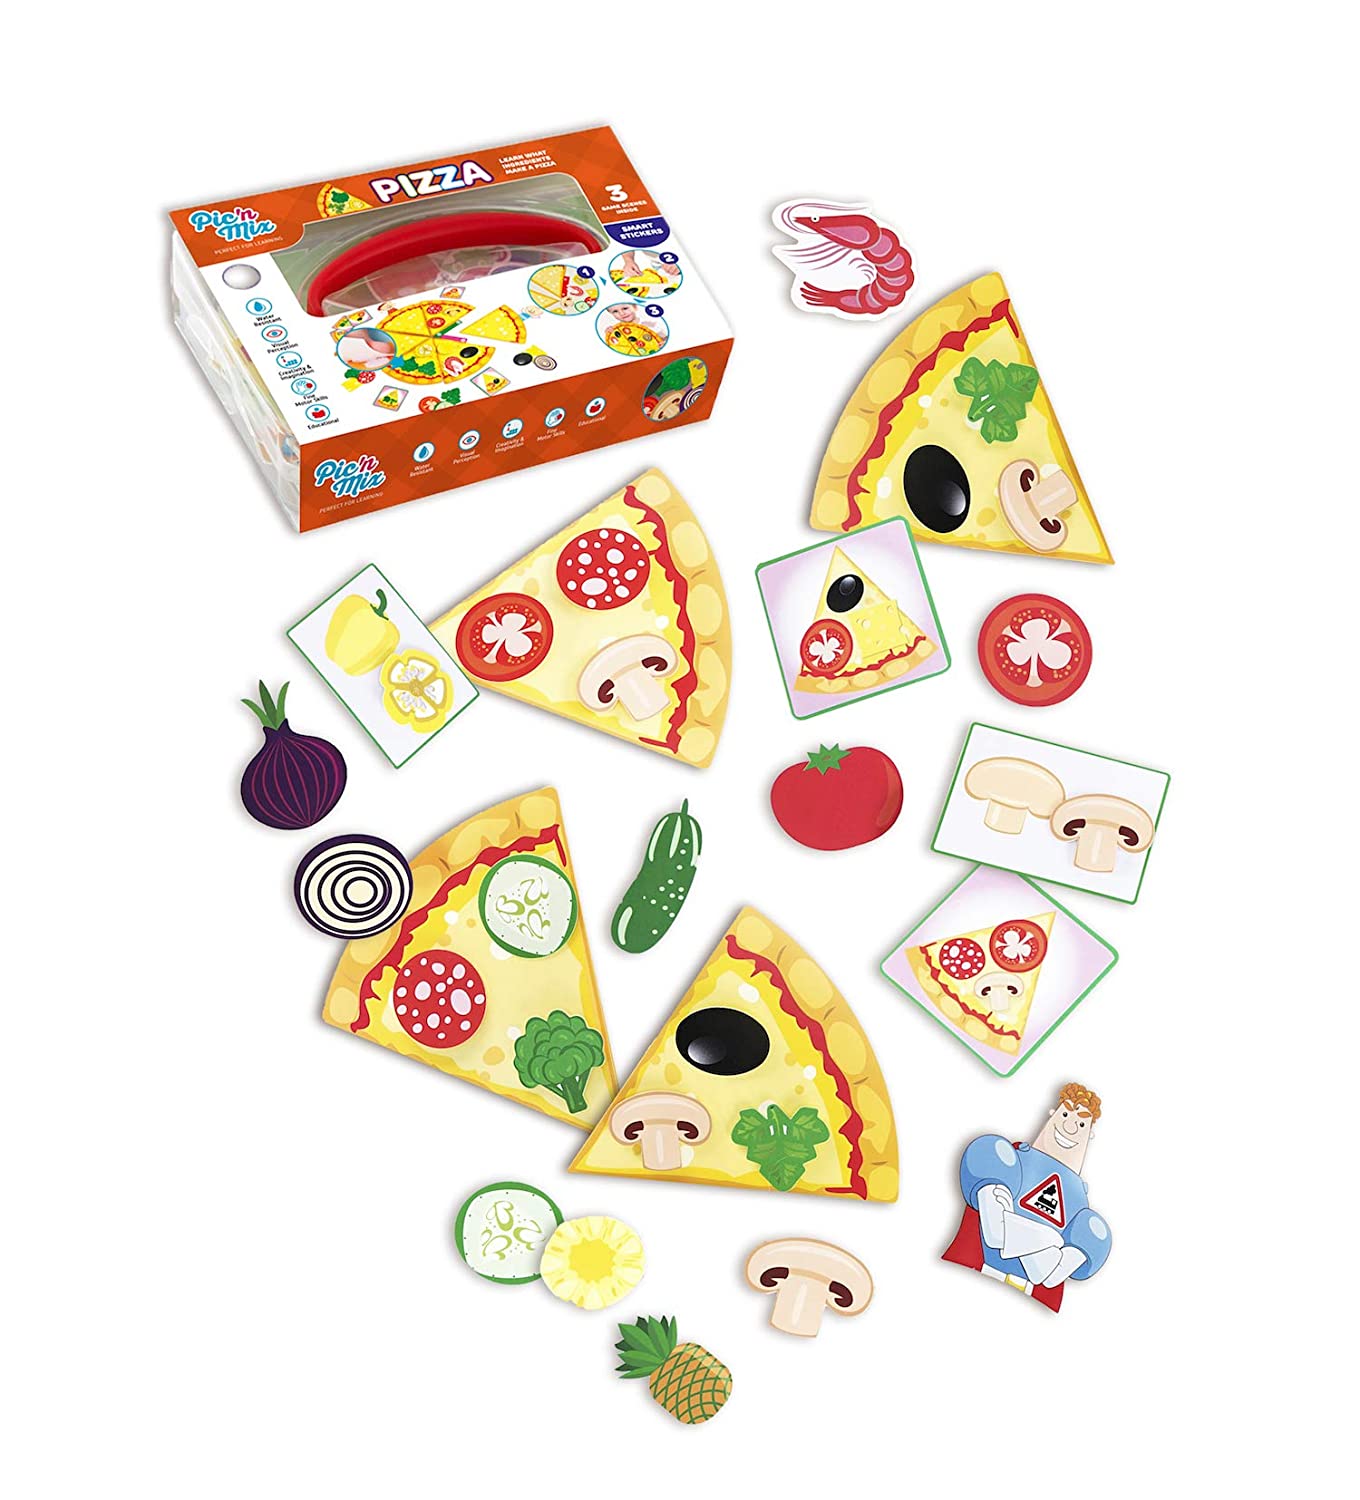 Pizza Puzzles for Kids | Picnmix Matching Game for Toddlers 2 Years and Up. Educational Board Game | Preschool Learning Toy. Fine Motor Skills Toy for Boys and Girls